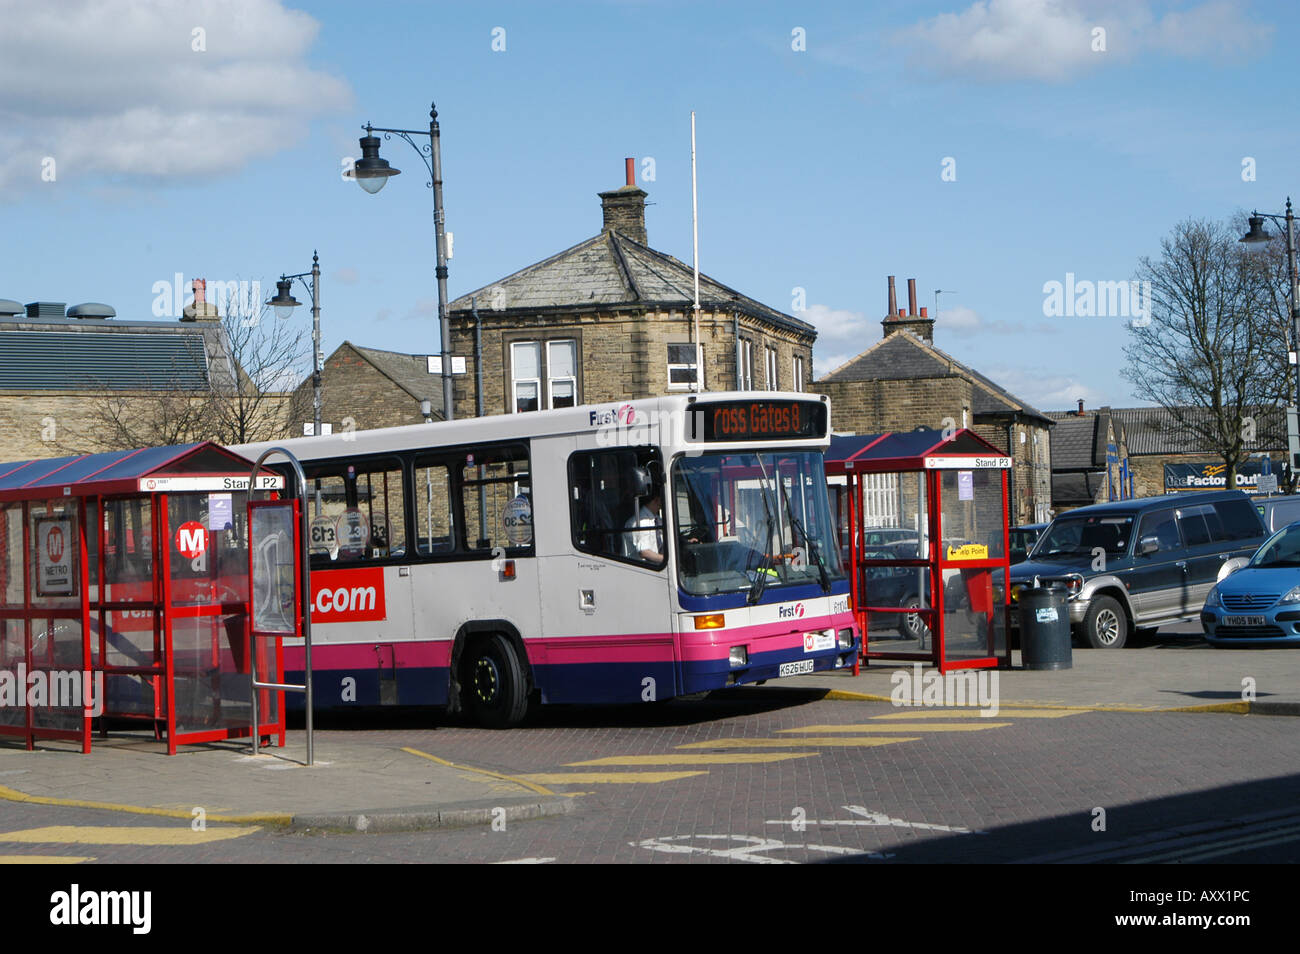 Single decker first bus in bus station in england Stock Photo